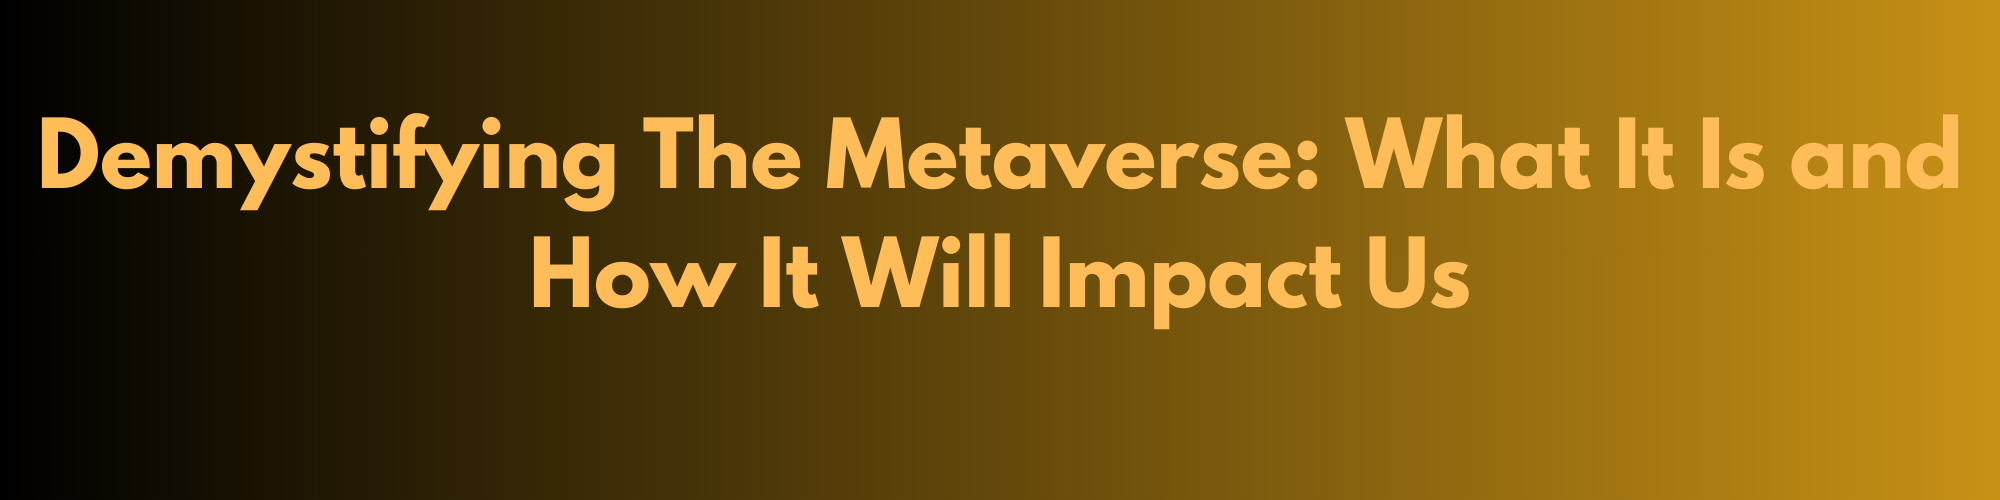 Demystifying the Metaverse: What it is and how it will impact us